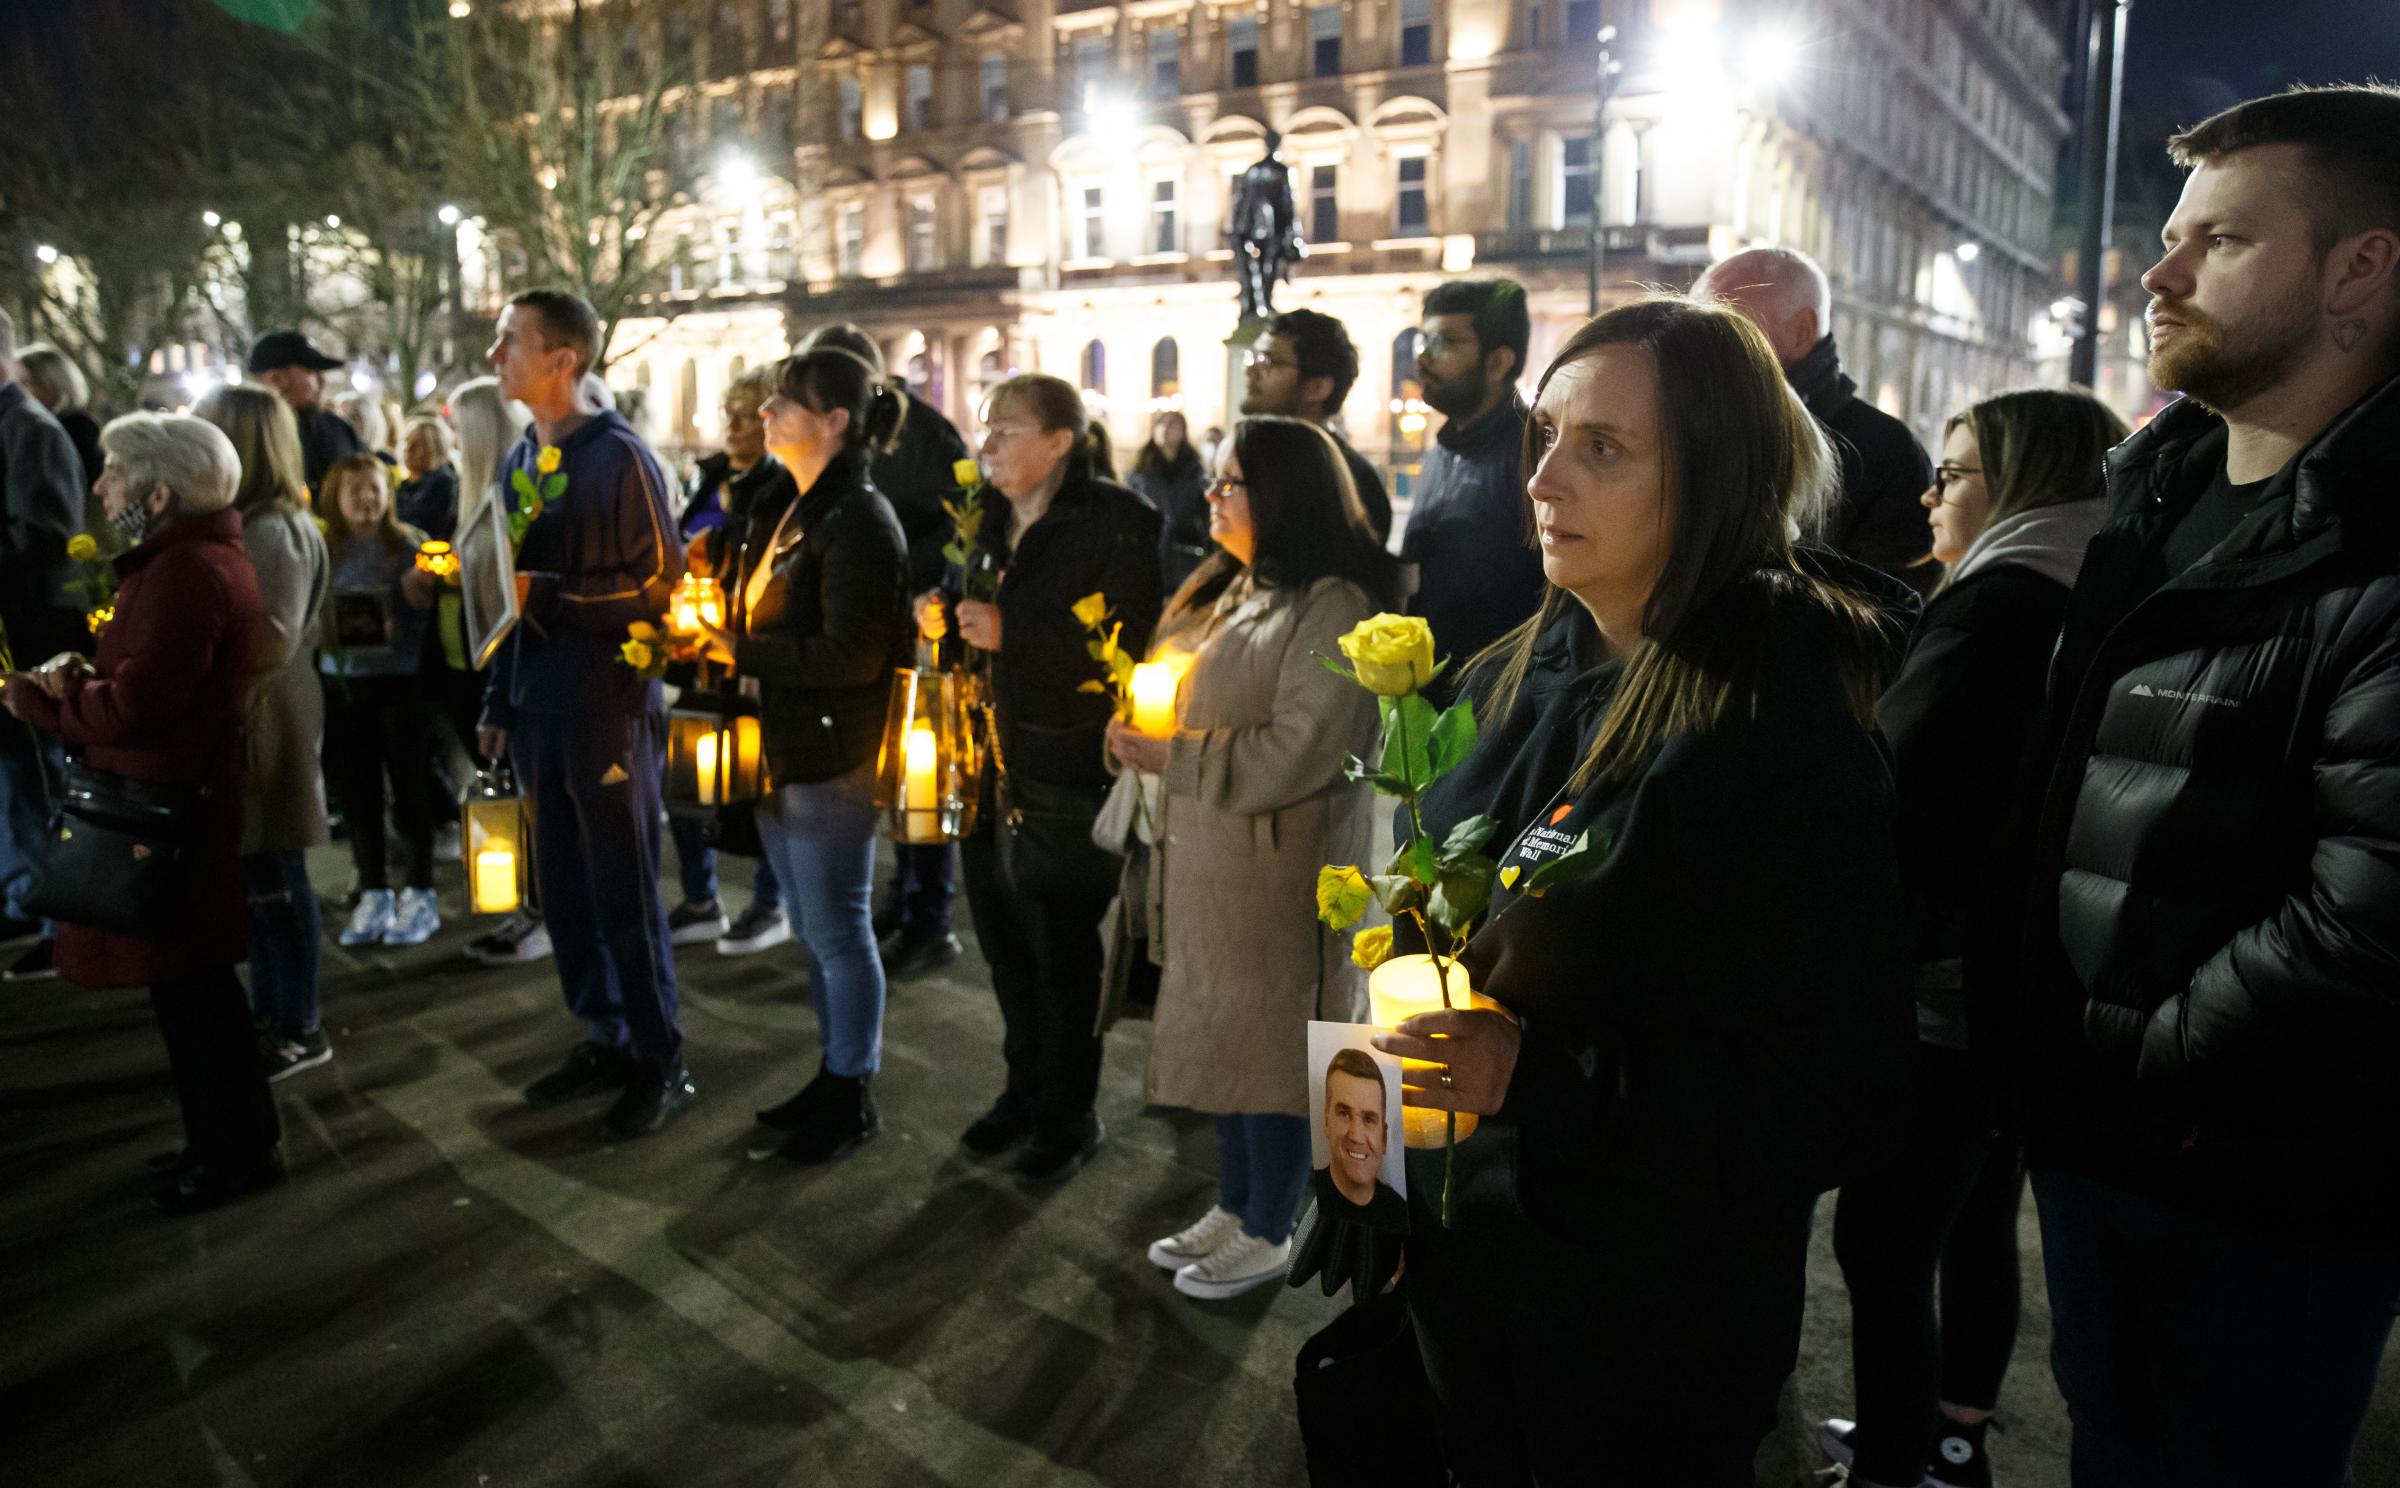 Vigil at George Square, Glasgow to mark the second national lockdown anniversary. The event attended by families who lost loved ones in the covid pandemic was organised by Covid 19 Families Scotland. Pictured are people holding lanterns and yellow roses